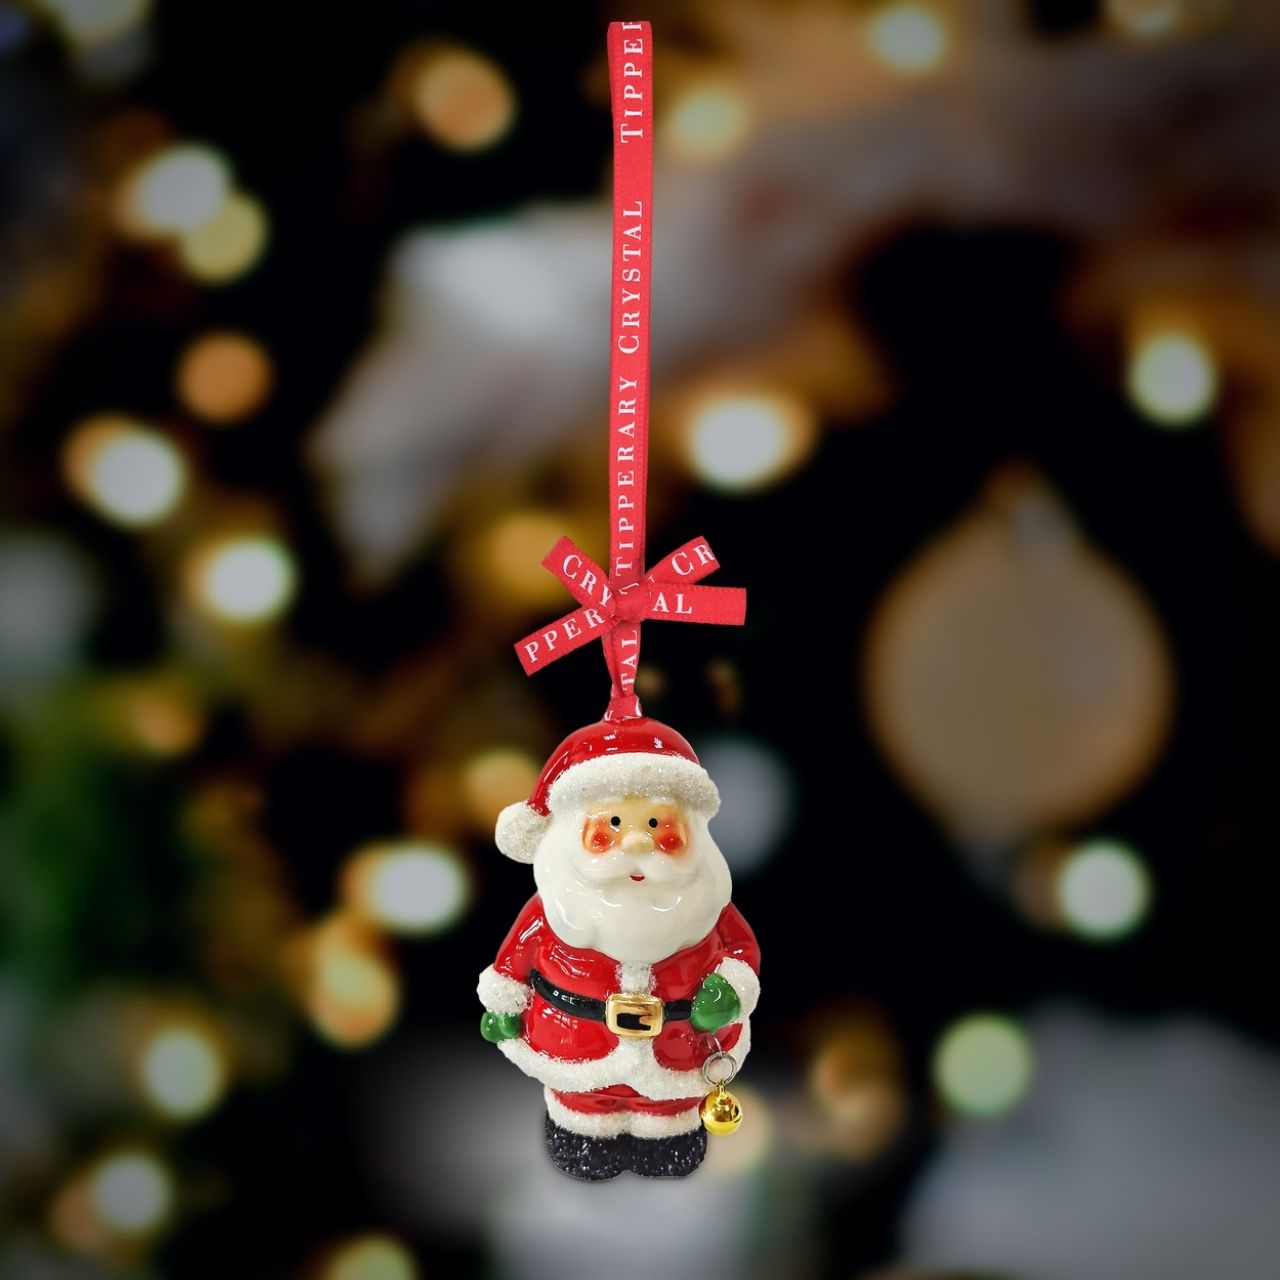 Porcelain Decoration - Santa Standing Christmas Ornament - NEW 2022  We just Love Christmas! The festive season, the giving of gifts, creating memories and being together with family and loved ones. Have lots of fun with our lovingly designed and created Christmas decorations, each one has a magic sparkle of elf dust!